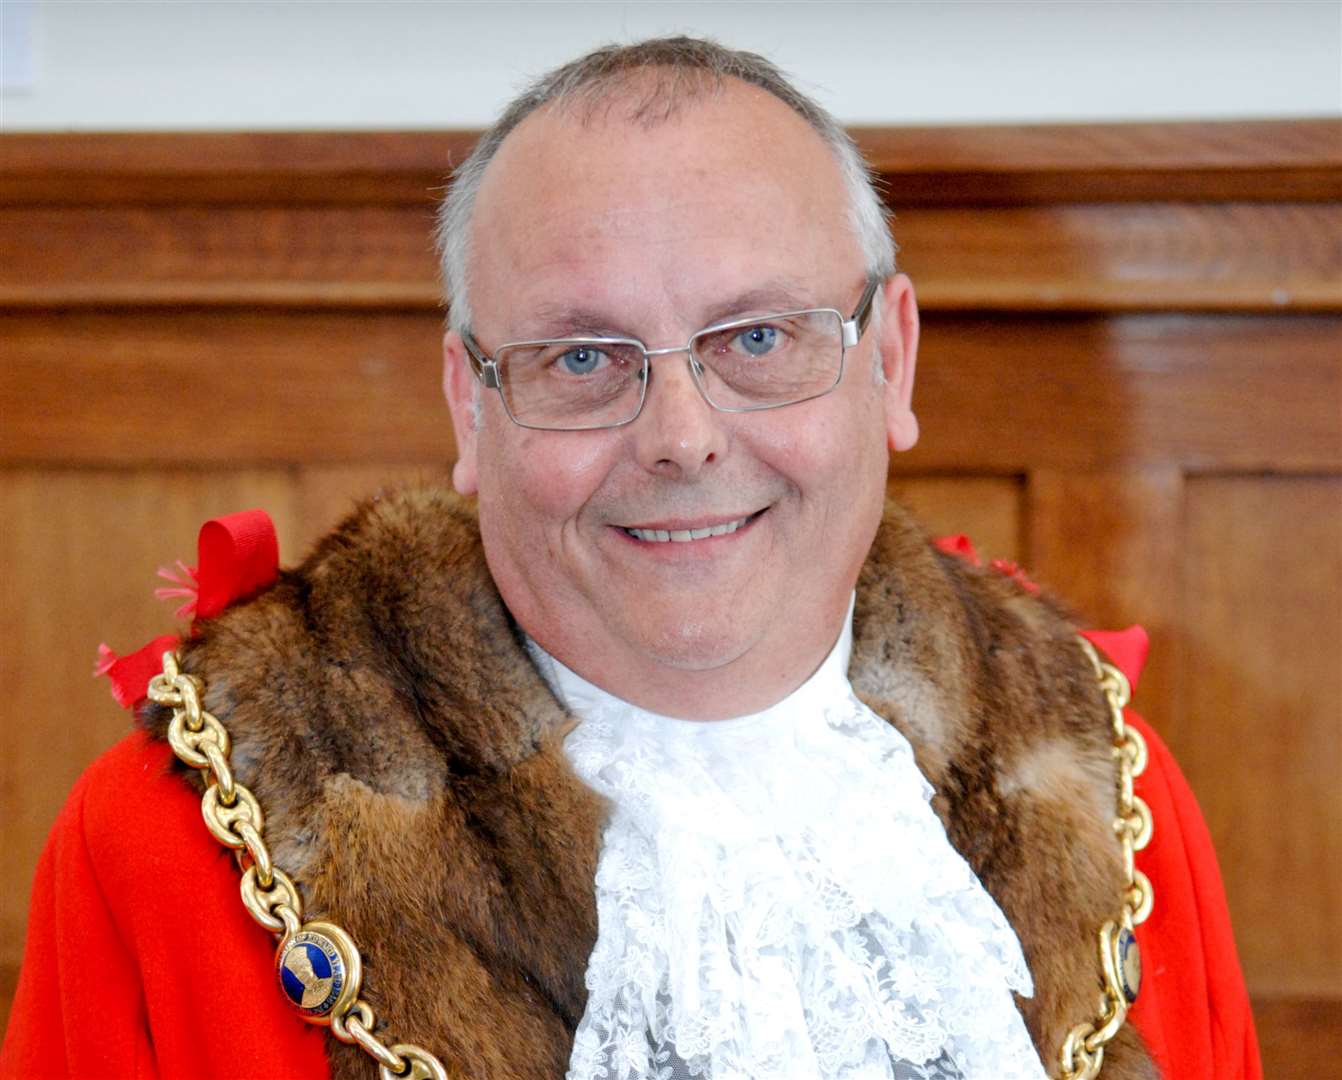 Brian Mortimer became Mayor of Maidstone in 2001